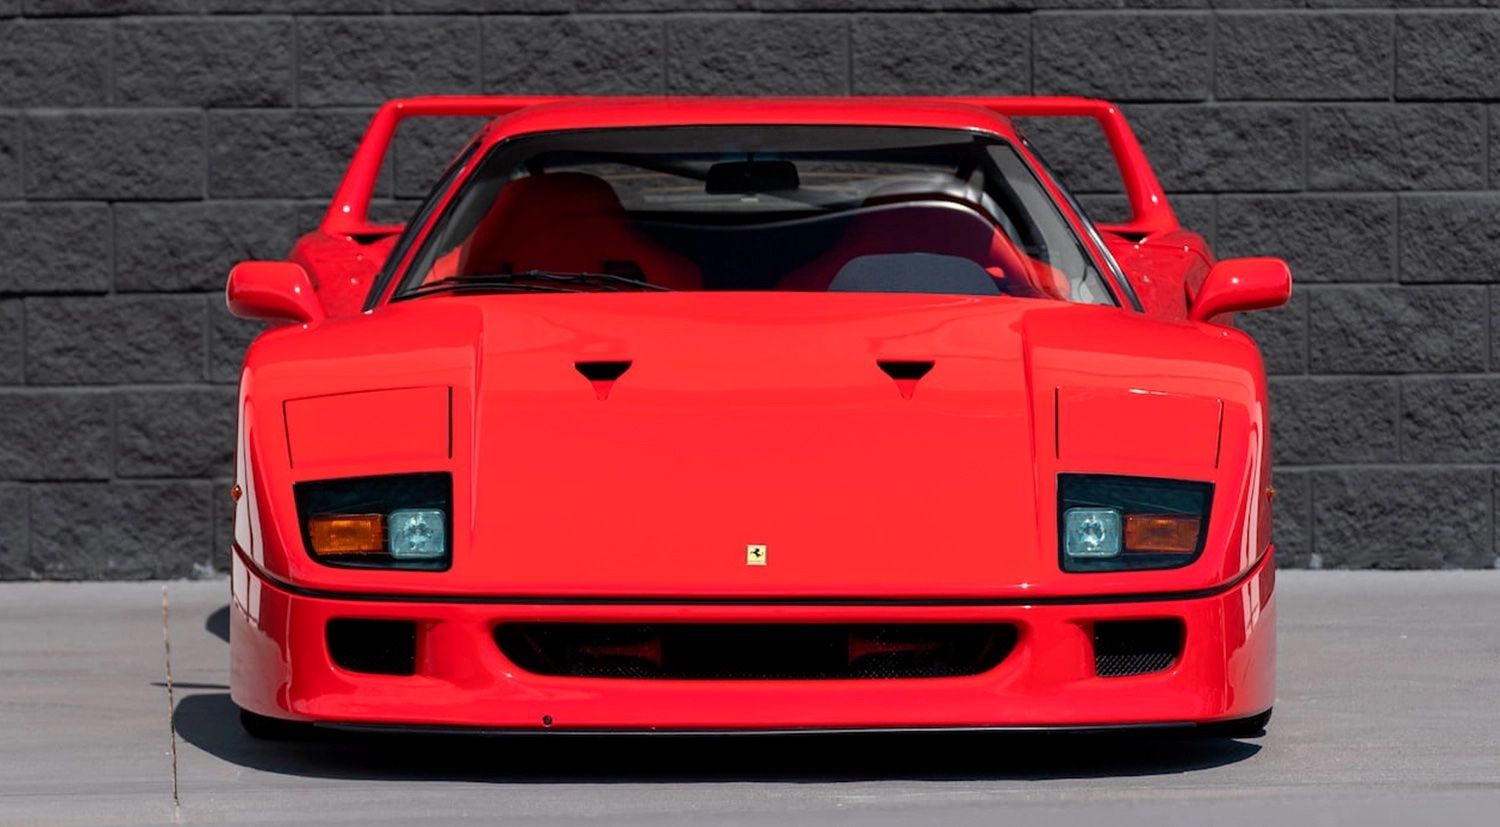 front view of the Ferrari F40